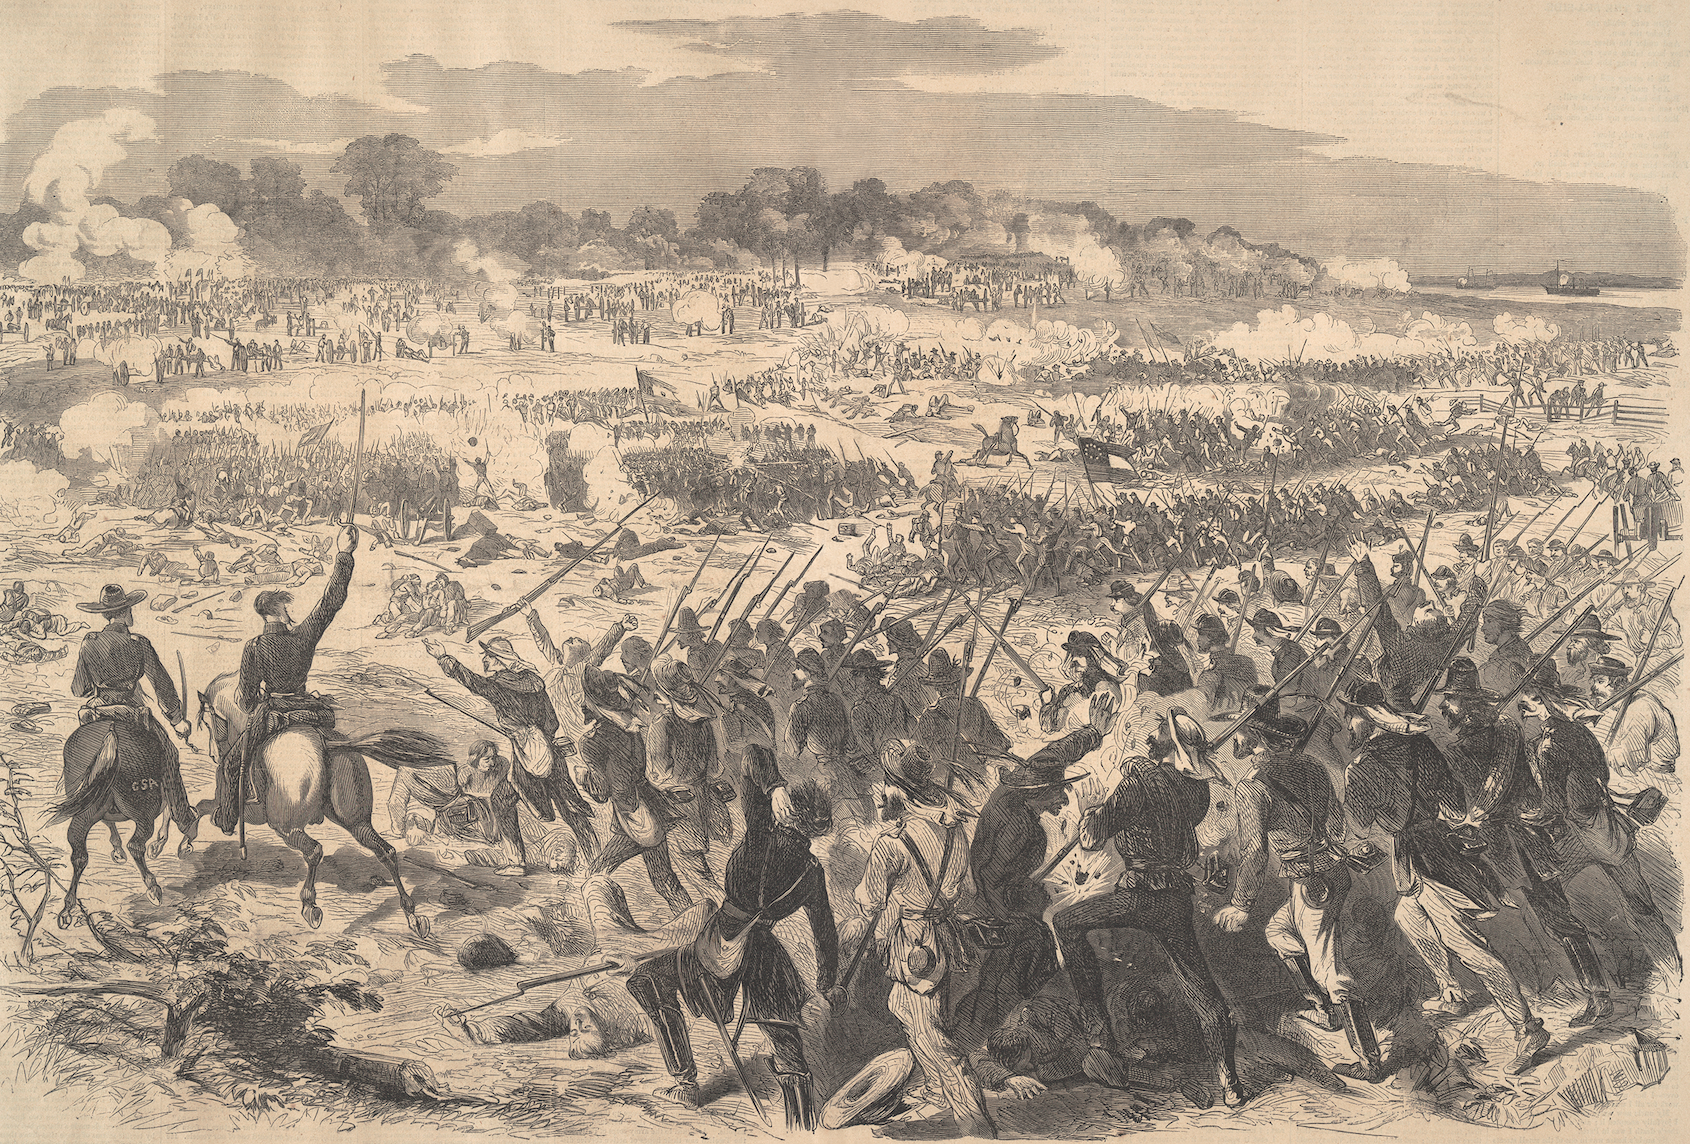 A Harper’s Weekly engraving of the Battle of Malvern Hill shows Confederate infantry charging toward a wall of Union cannons positioned nearly hub to hub. A Georgian in Huger’s Division remembered that shells “burst over our heads, under our feet, and in our faces. (Harper’s Weekly)